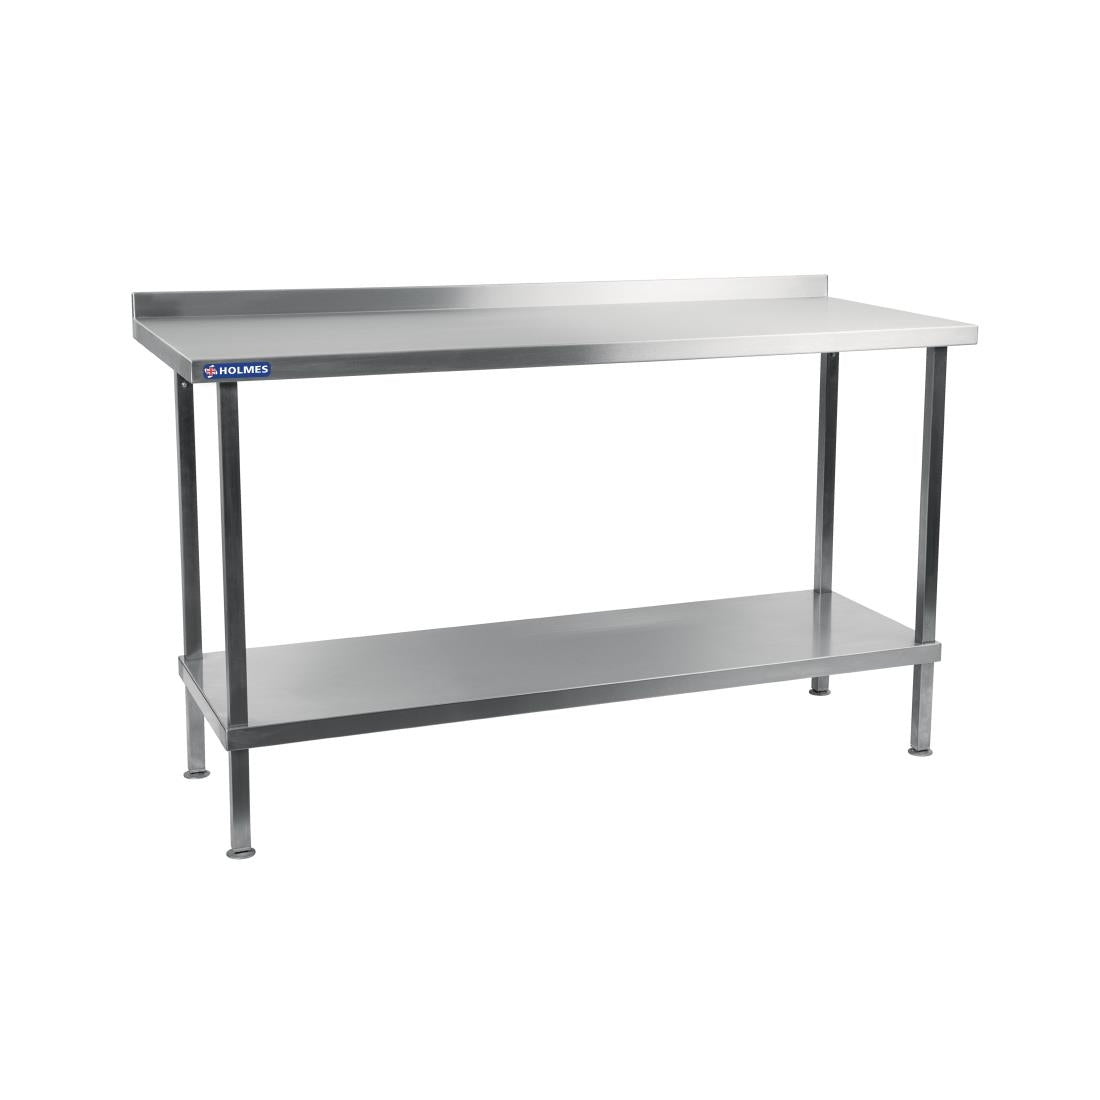 DR030 Holmes Stainless Steel Wall Table with Upstand 1500mm JD Catering Equipment Solutions Ltd